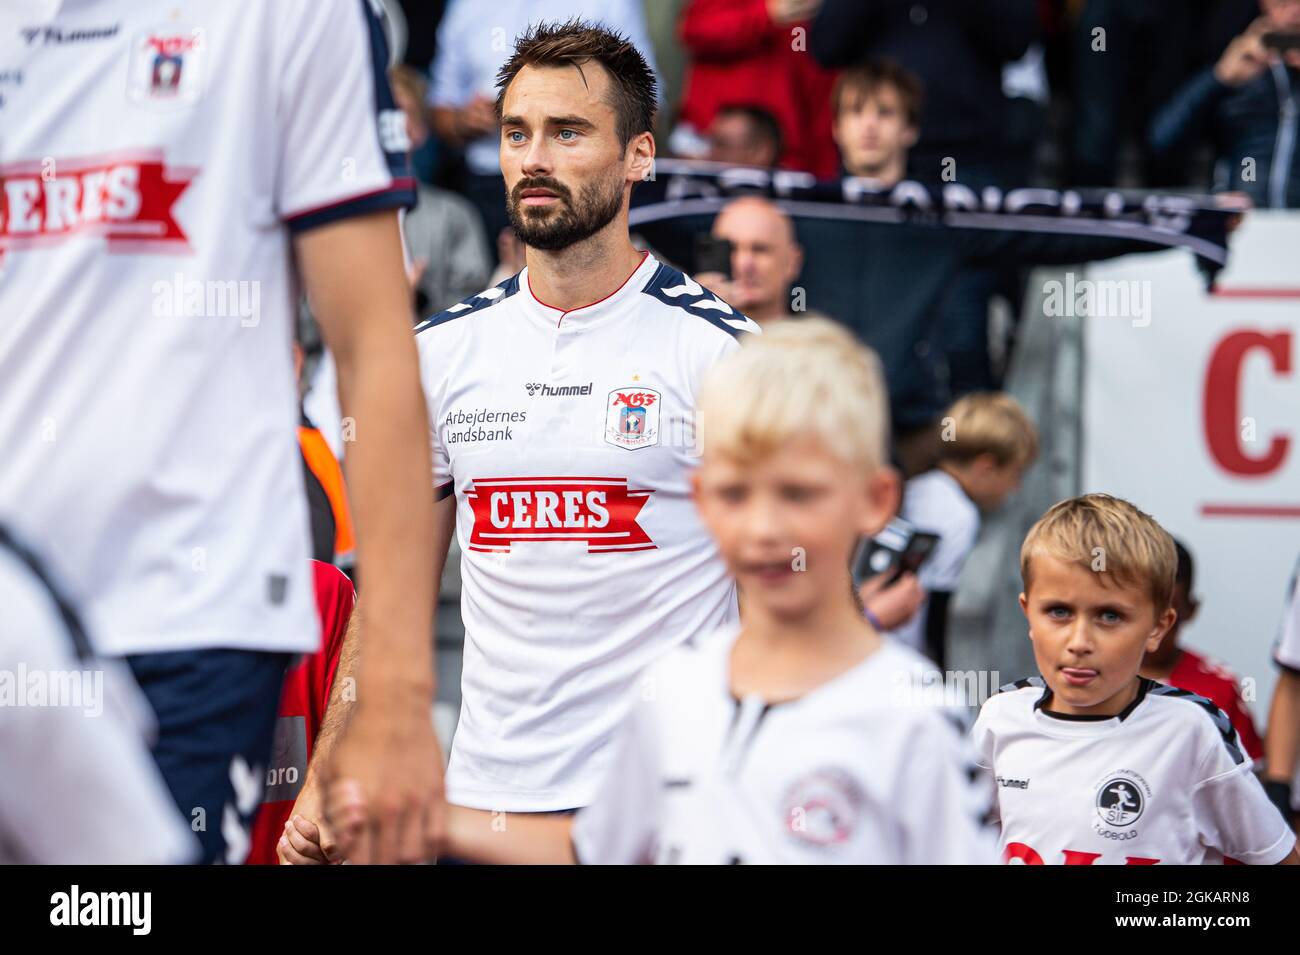 Aarhus, Denmark. 12th, September 2021. Oliver Lund (15) of AGF enters the pitch for the 3F Superliga match between Aarhus GF and Vejle Boldklub at Ceres Park in Aarhus. (Photo credit: Gonzales Photo - Morten Kjaer). Stock Photo